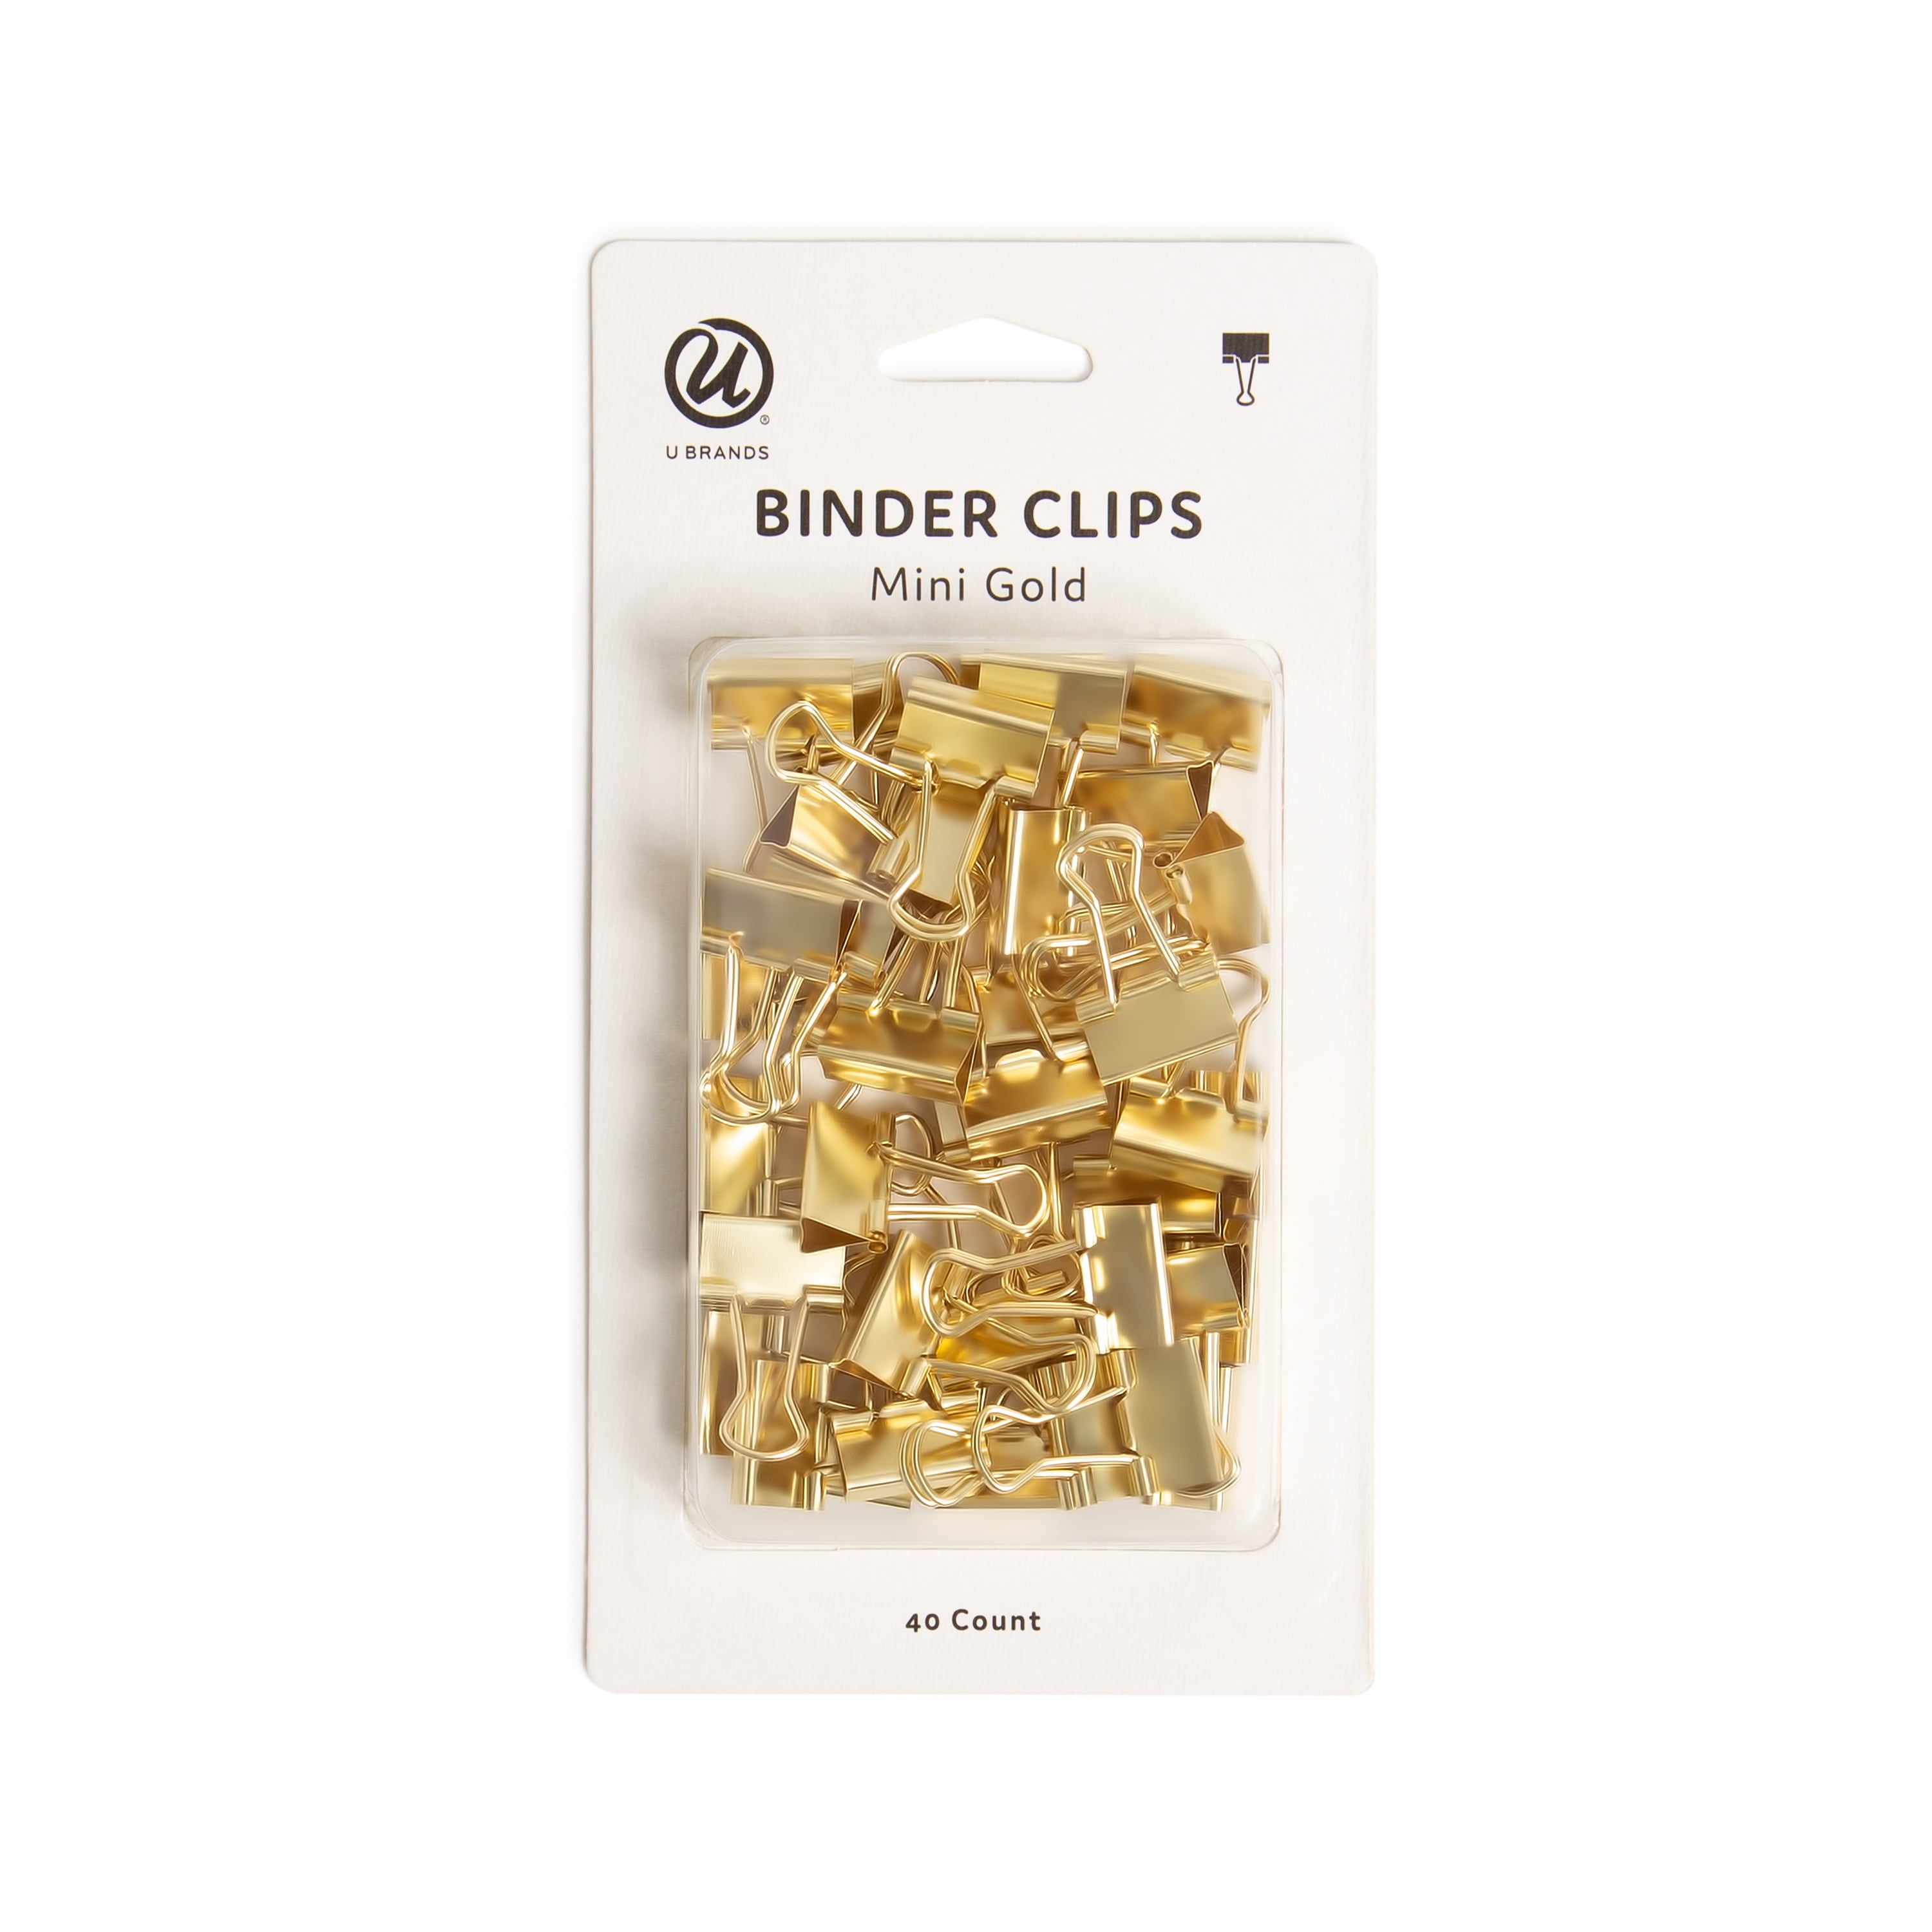 GOLD BINDER CLIPS MEDIUM 2 INCHES LONG 1.25 INCHES WIDE QTY 10 